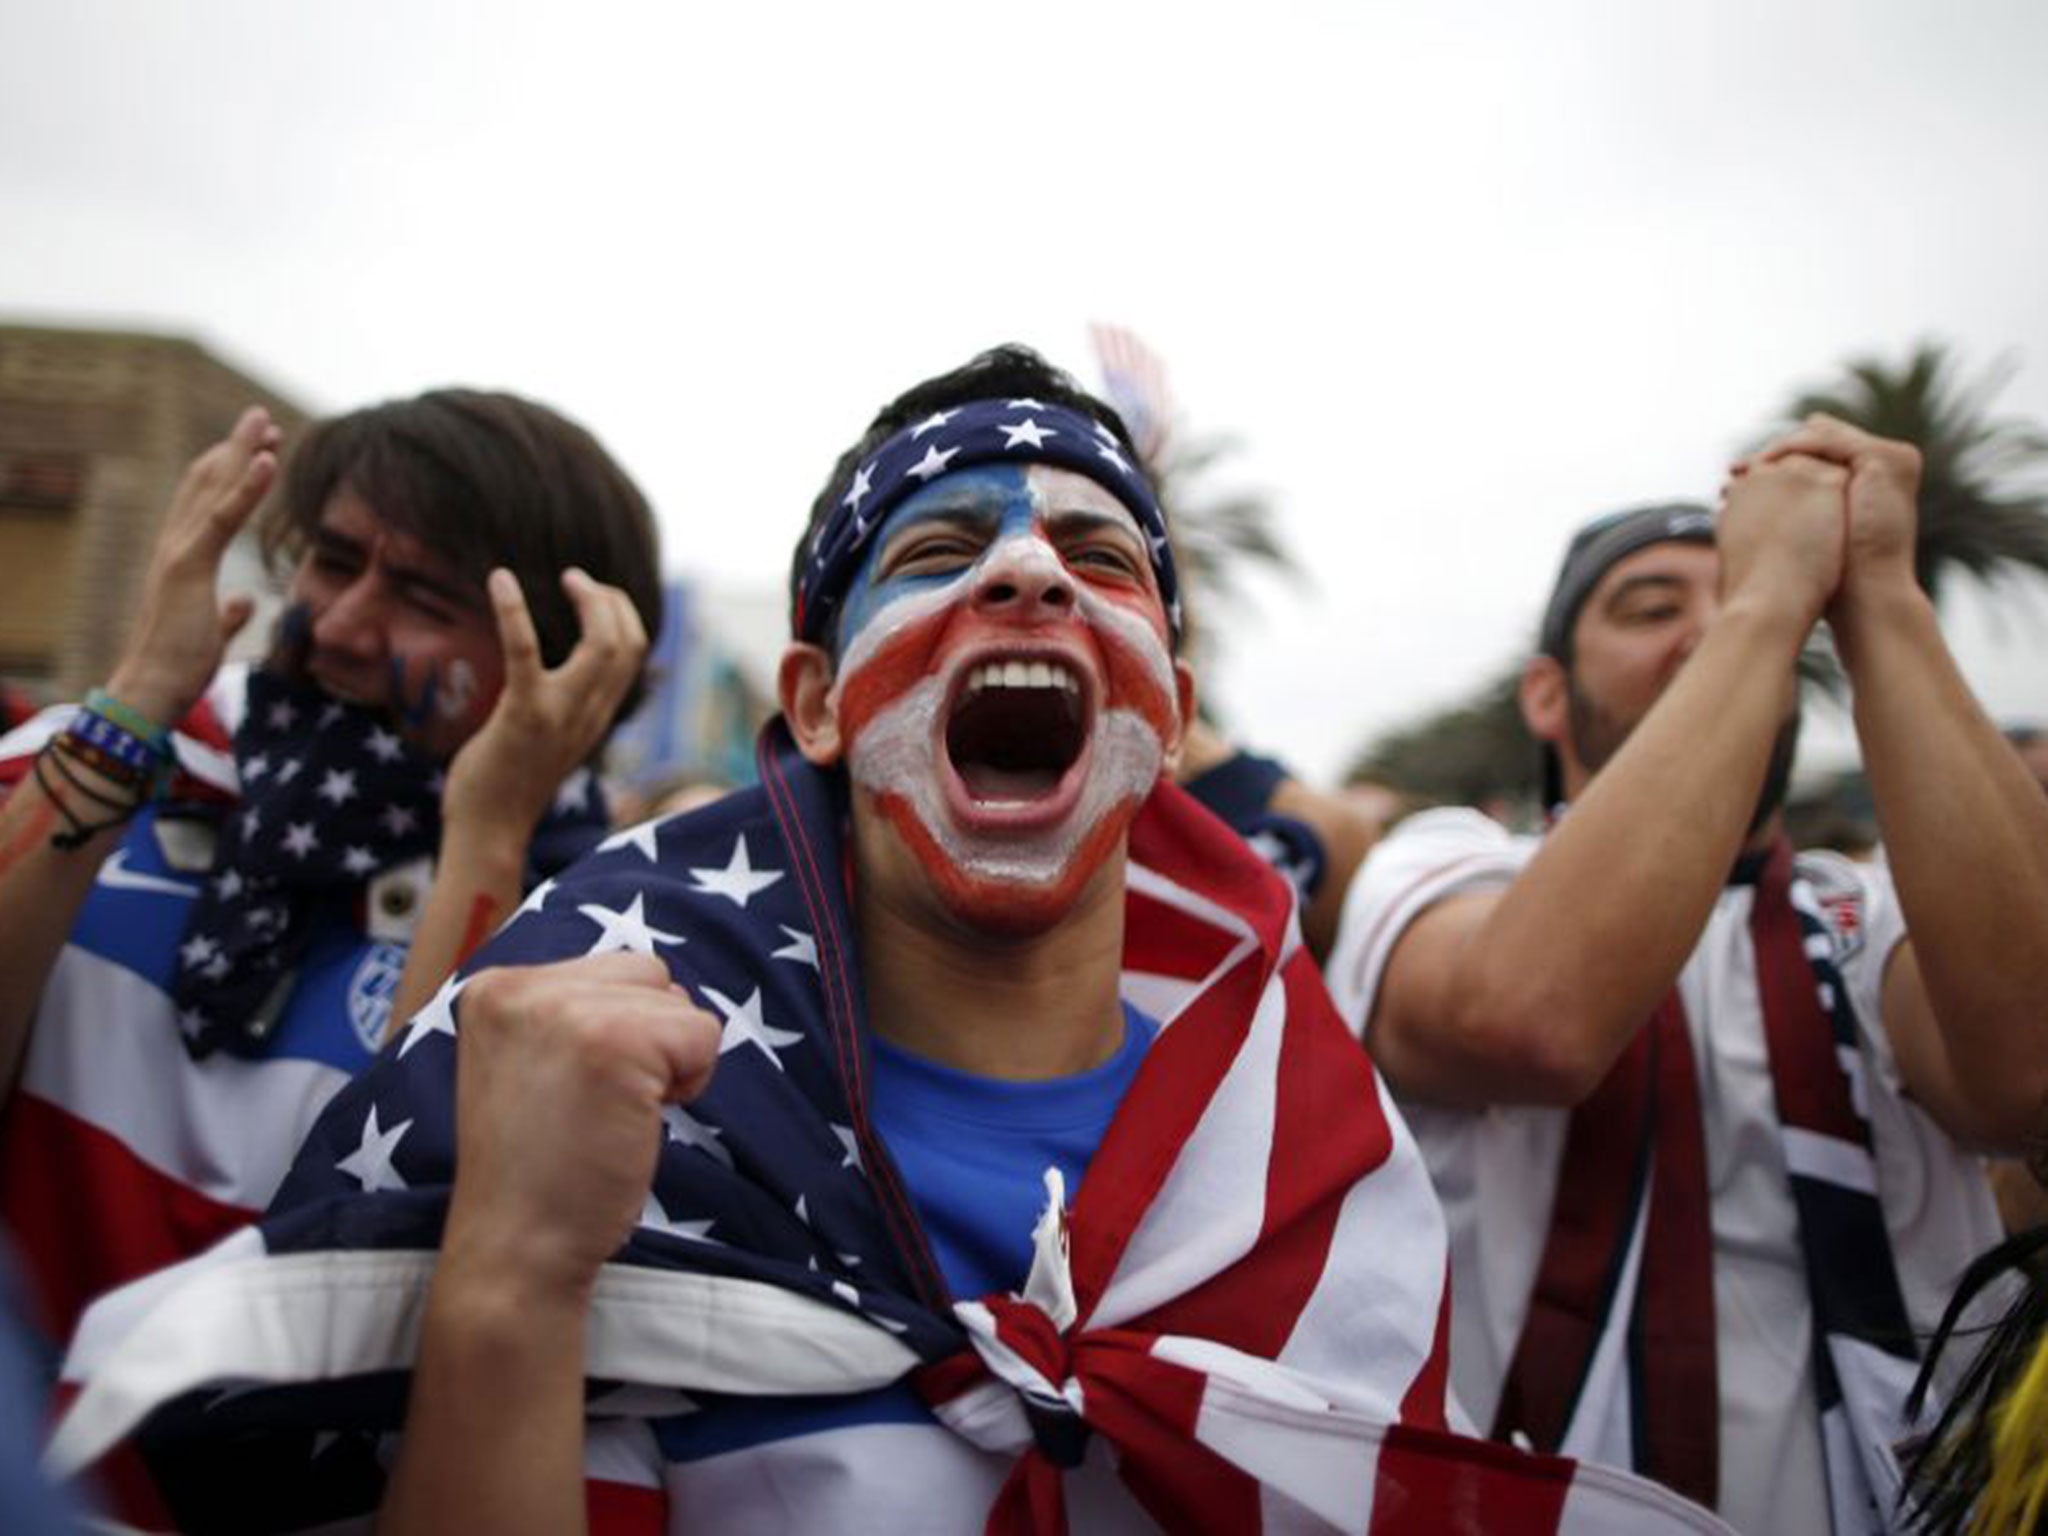 24.7 million people in America watched the US team’s recent World Cup match with Portugal